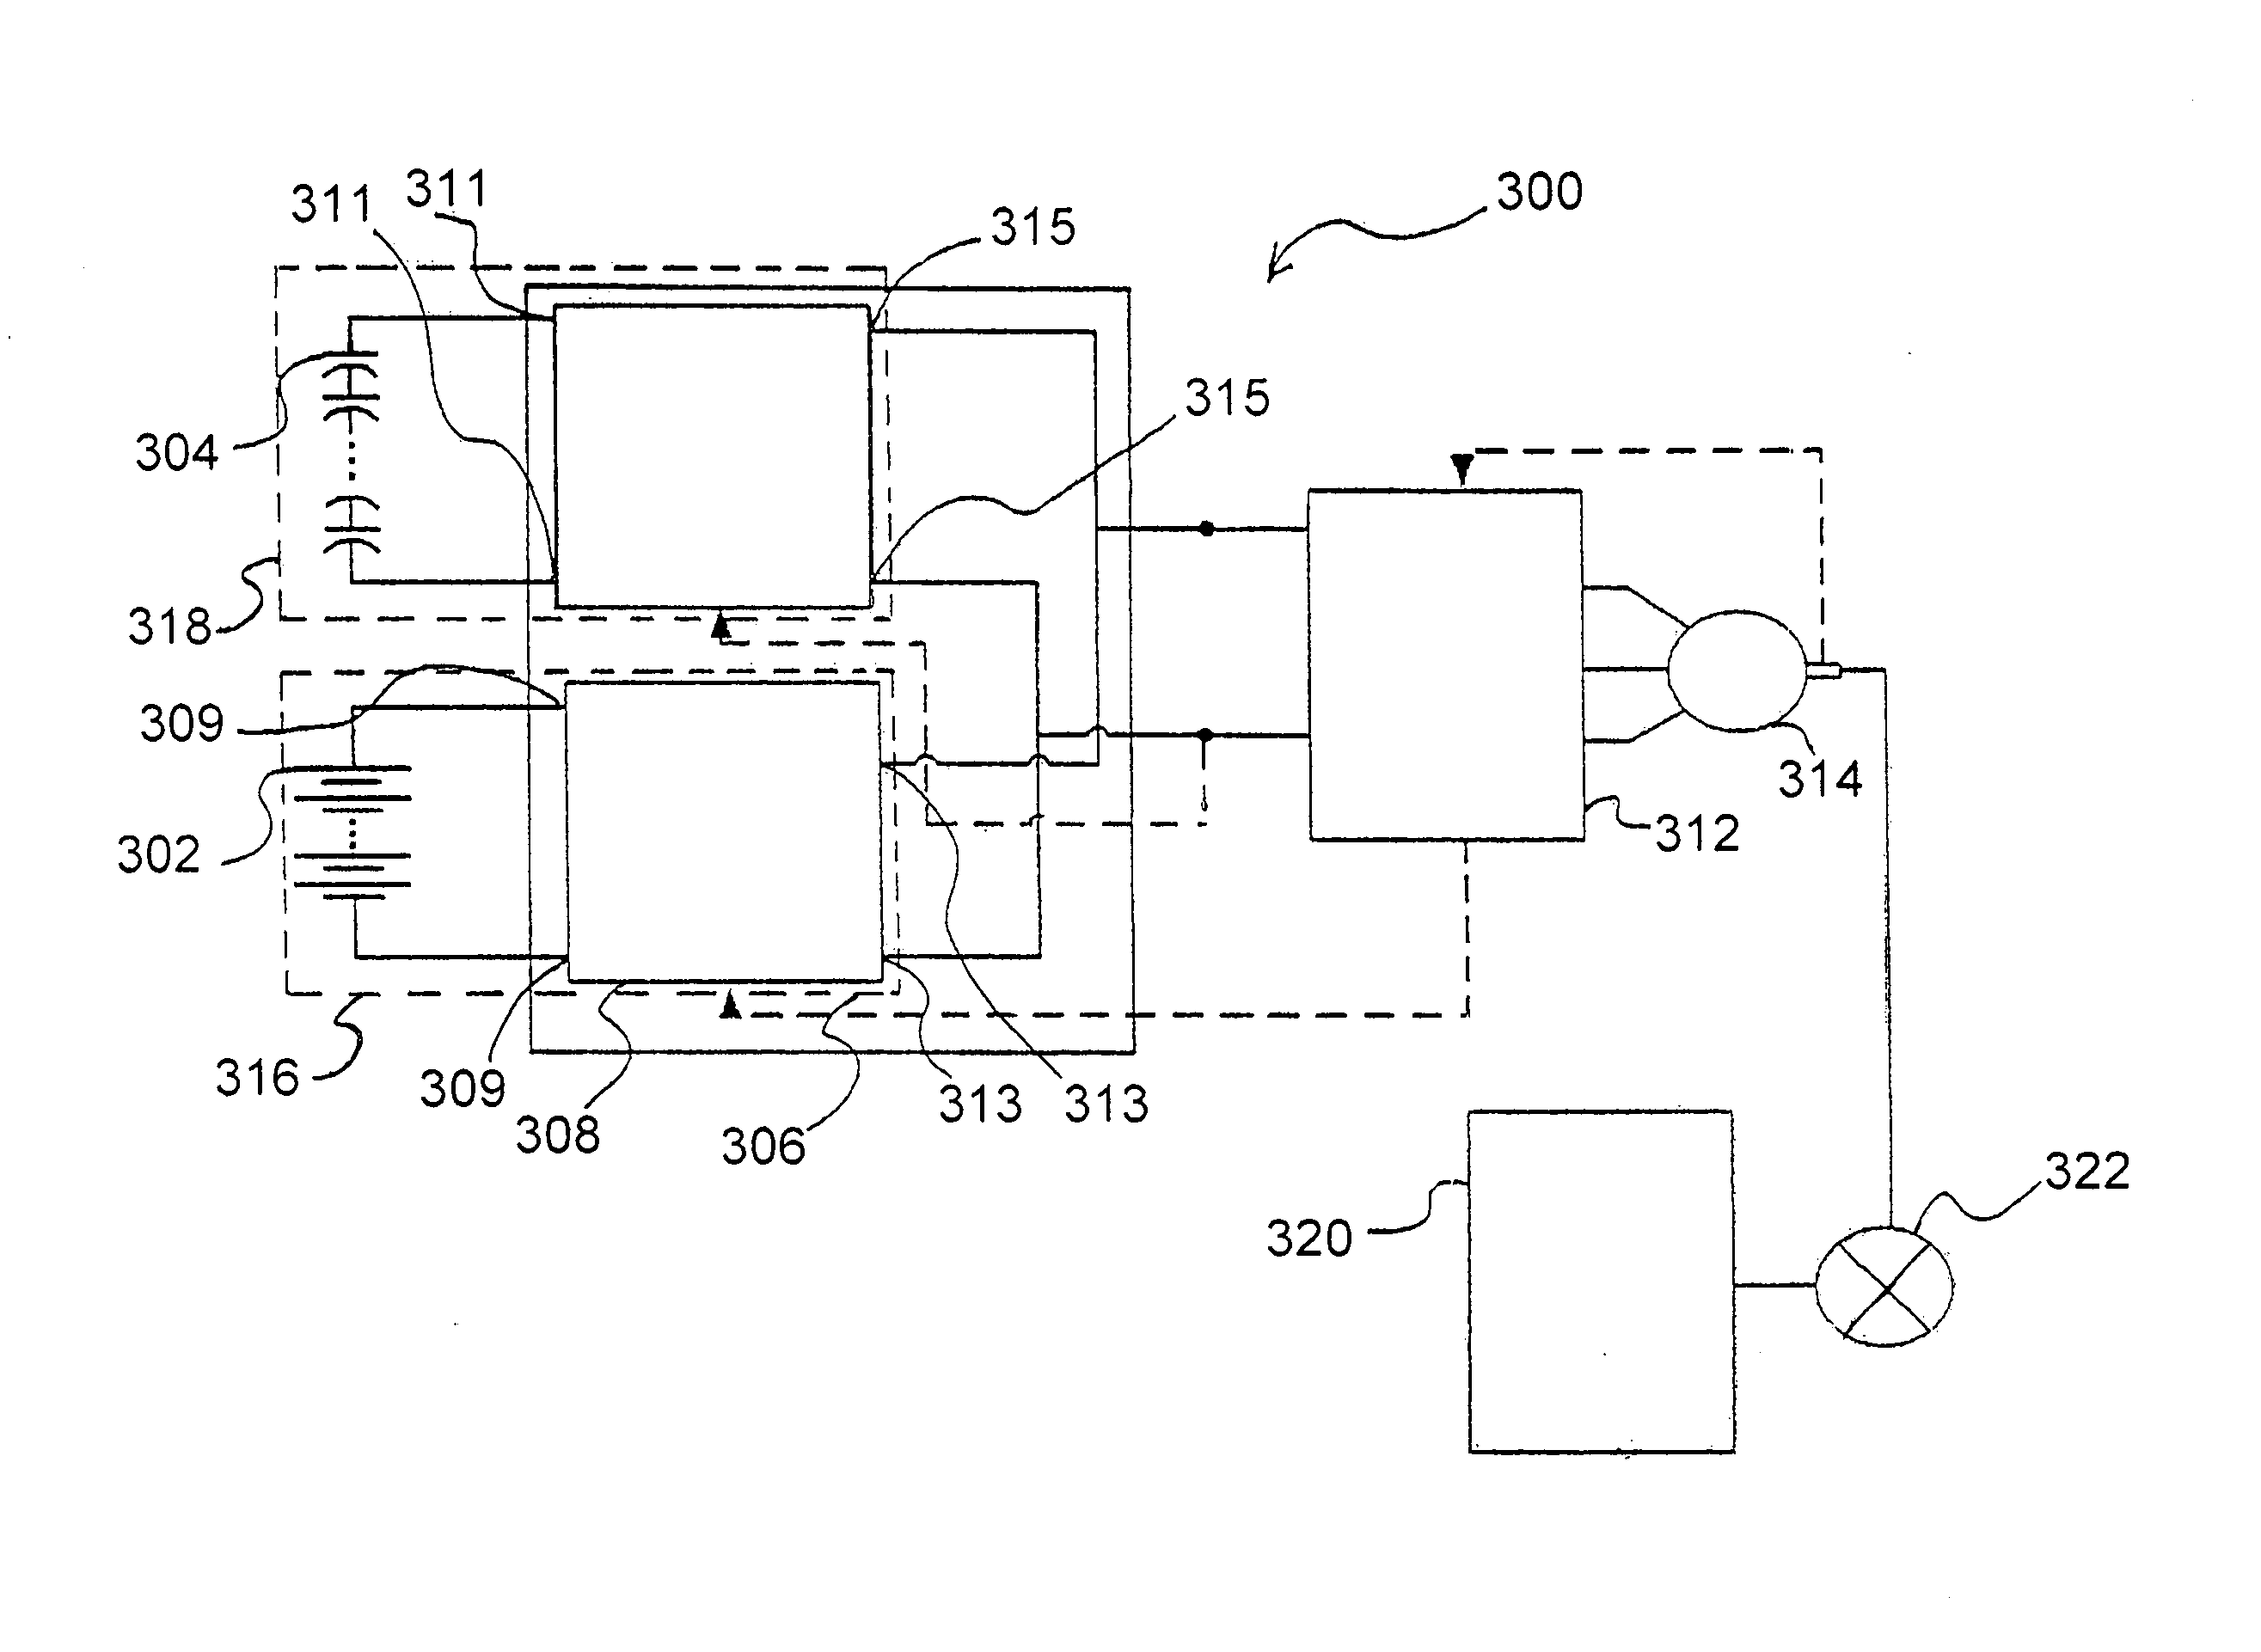 Power management for multi-module energy storage systems in electric, hybrid electric, and fuel cell vehicles